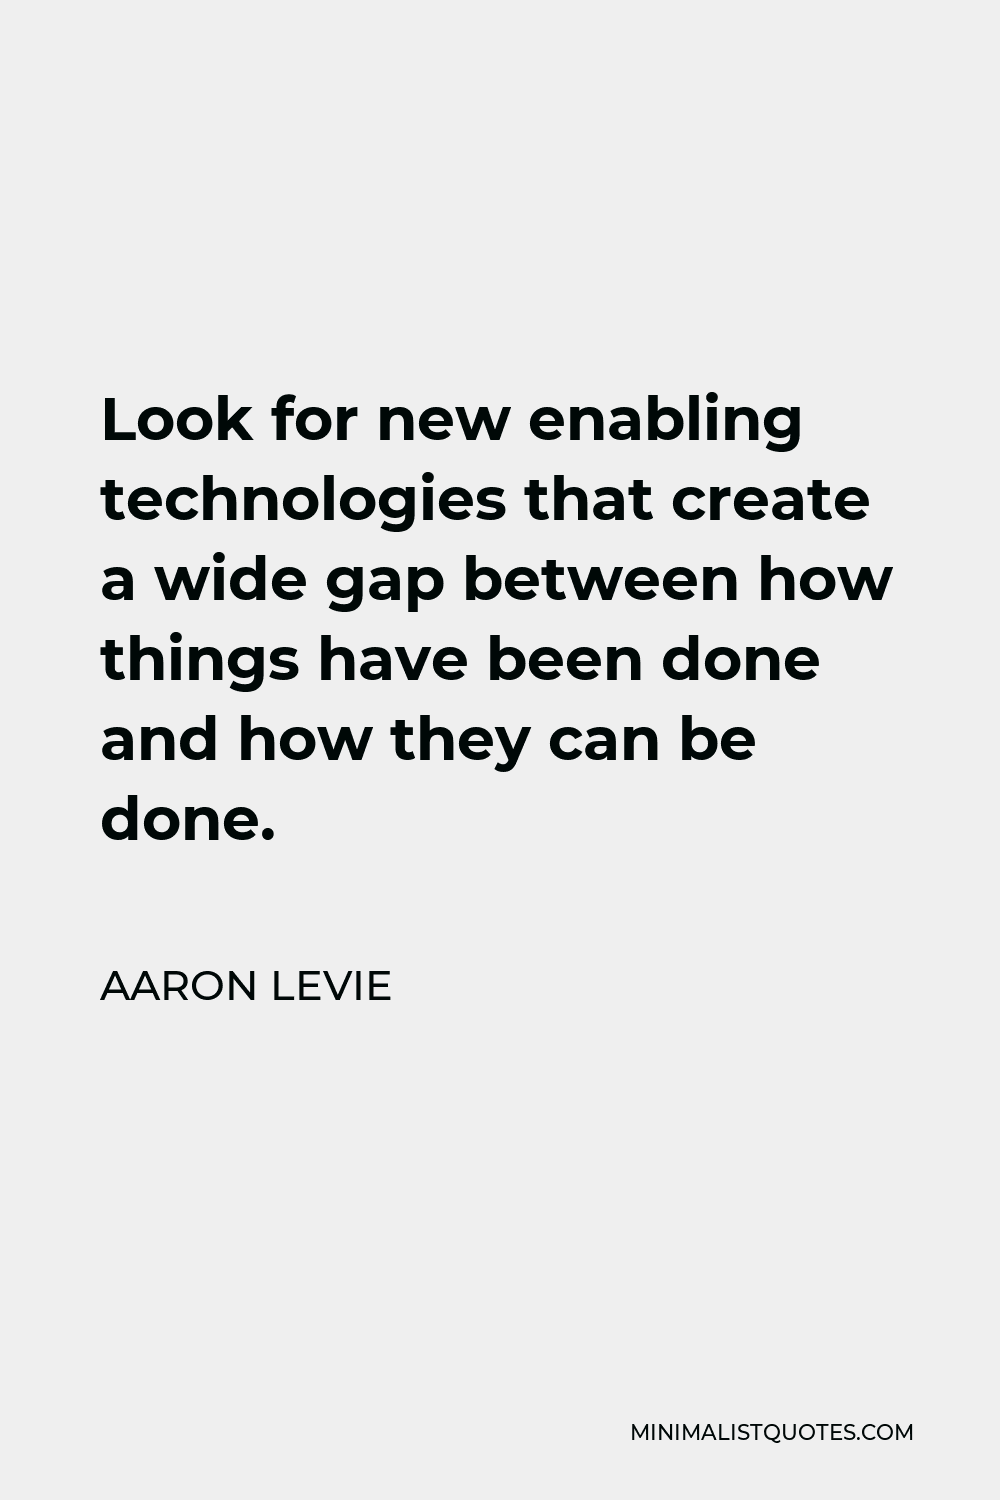 Aaron Levie Quote - Look for new enabling technologies that create a wide gap between how things have been done and how they can be done.